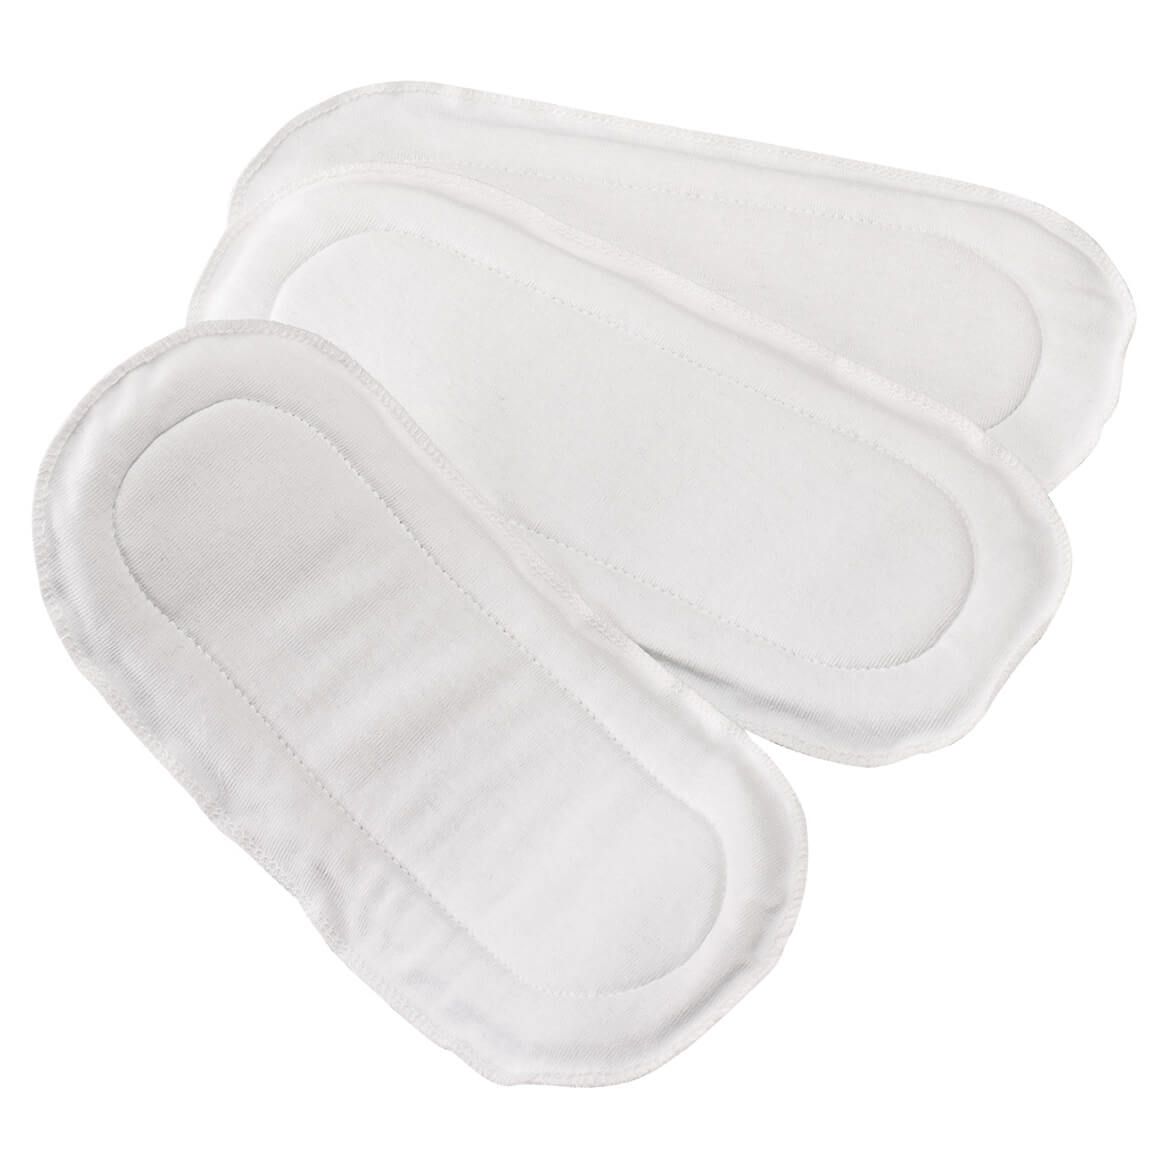 Reusable Incontinence Pads Set of 3 + '-' + 340678